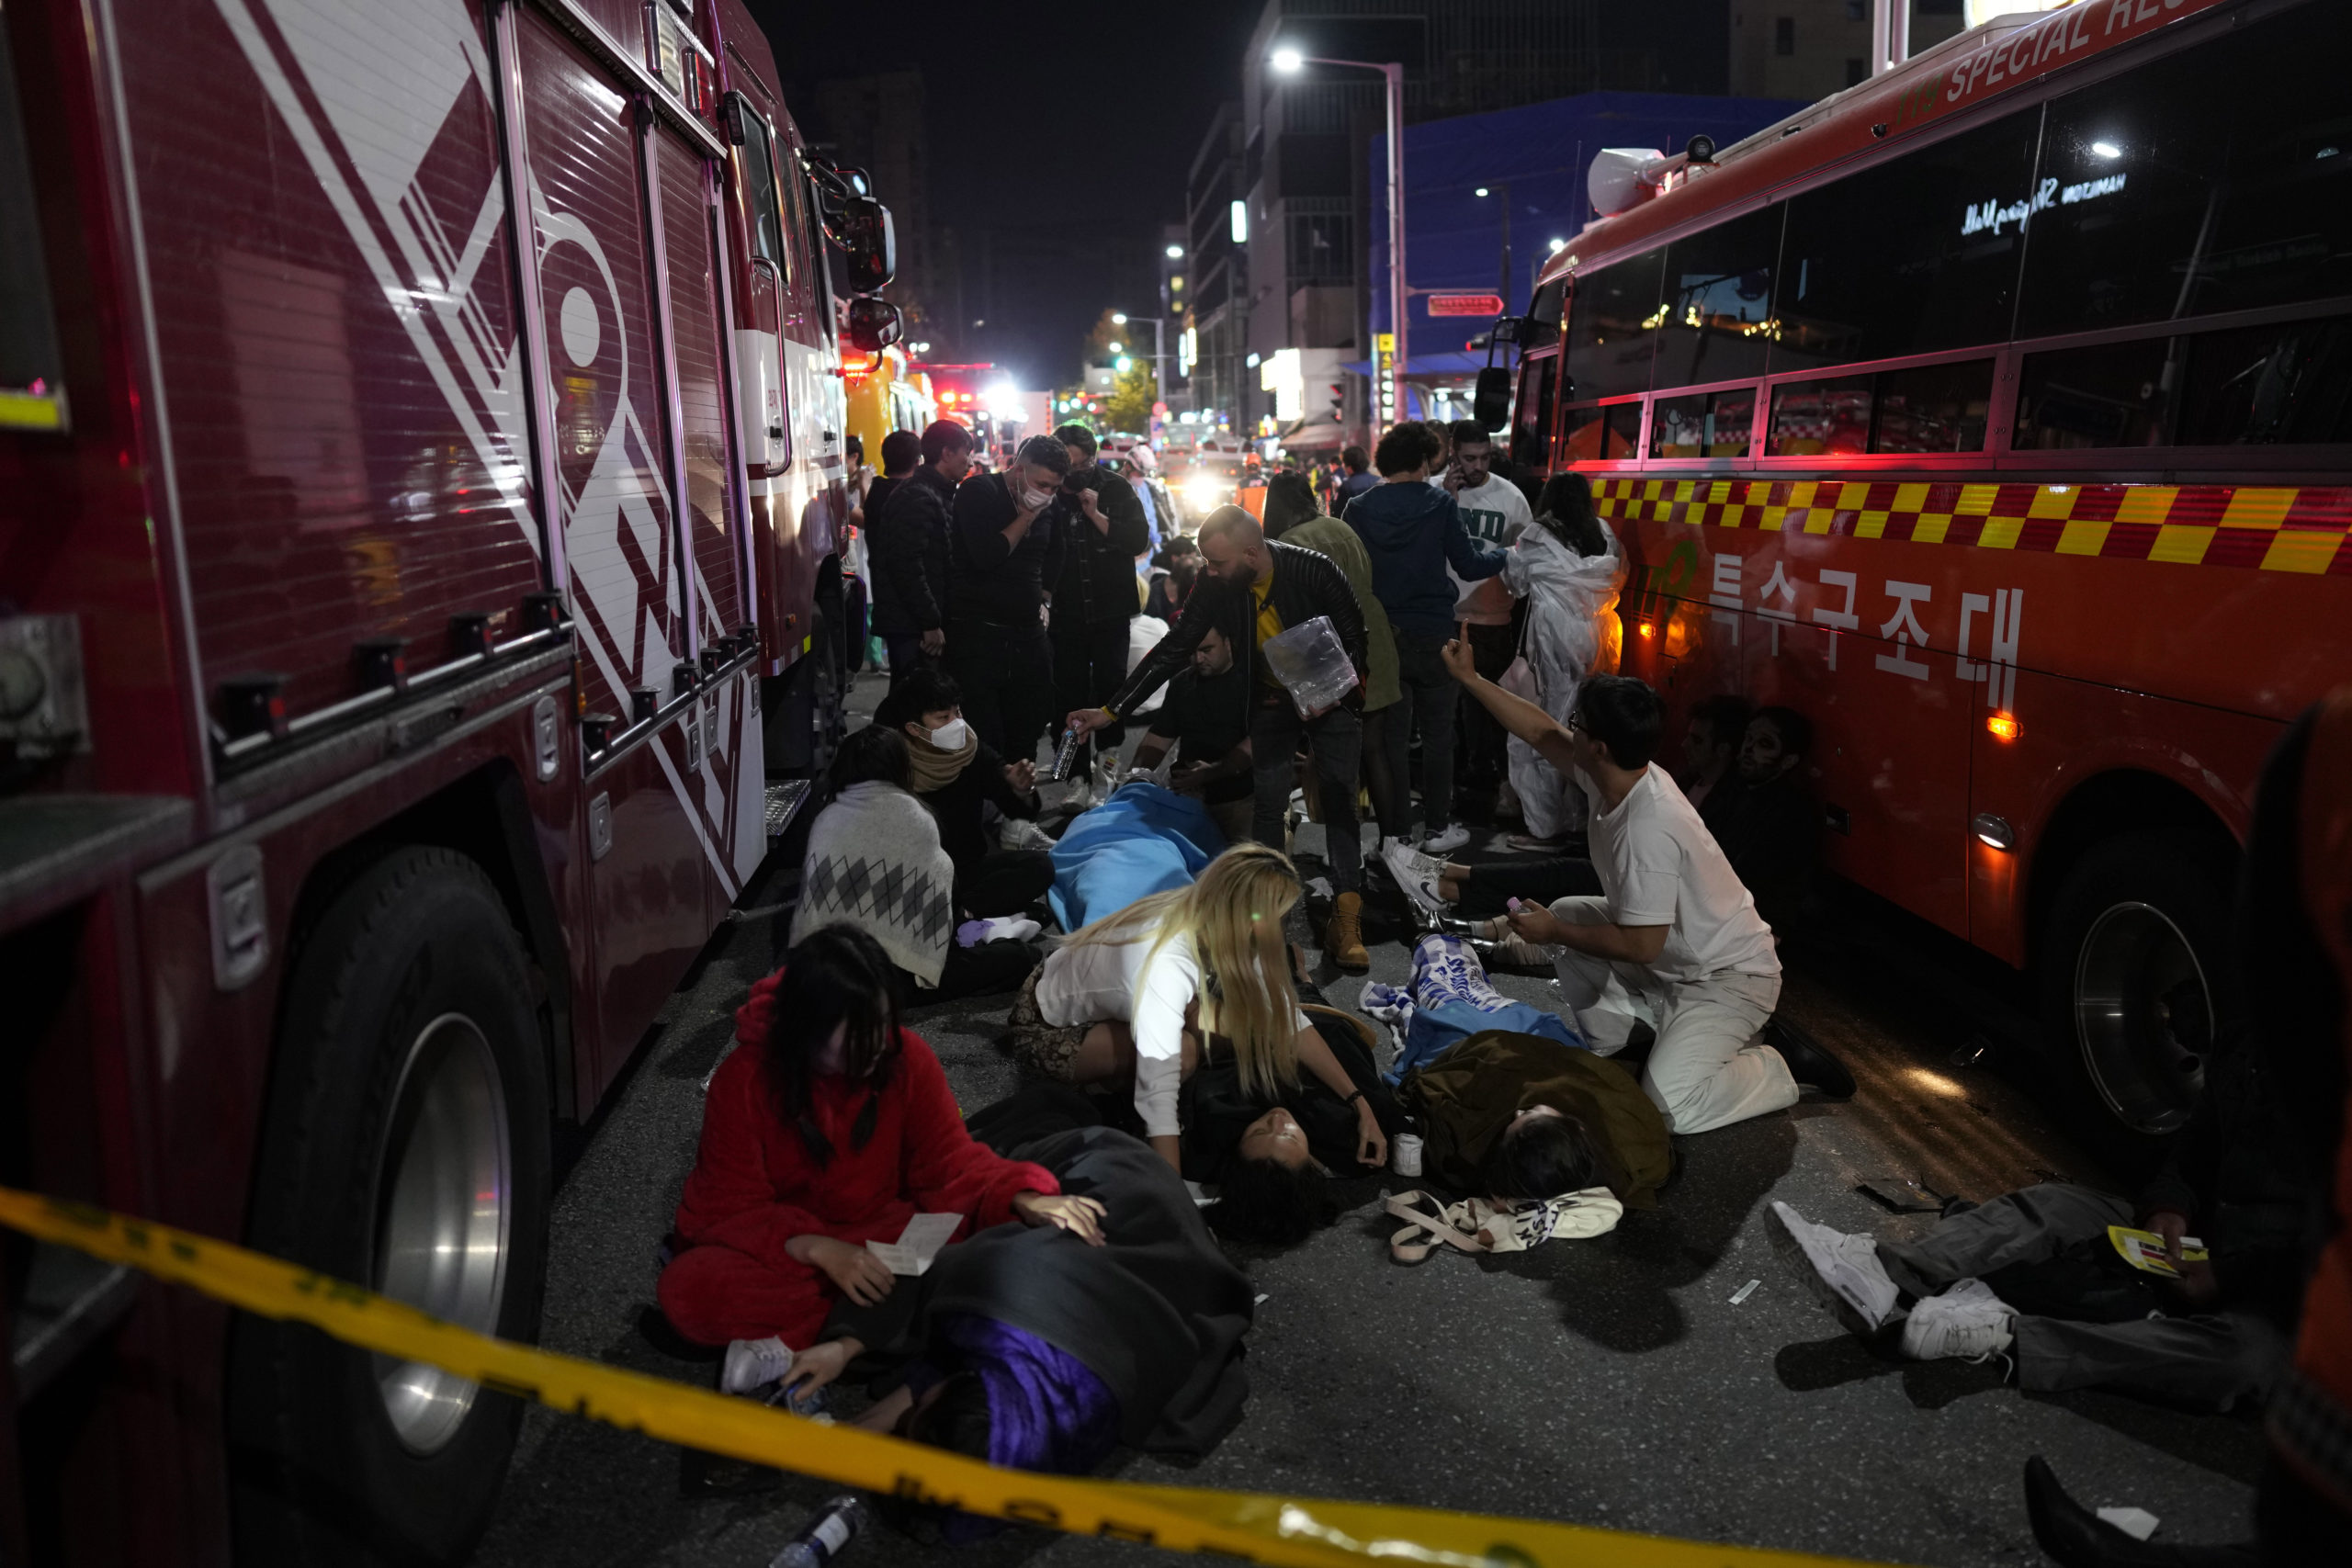 First responders and others attempt to help those who are injured after a crowd surge in Seoul, South Korea, on Saturday led to those attending the Halloween party to be crushed.